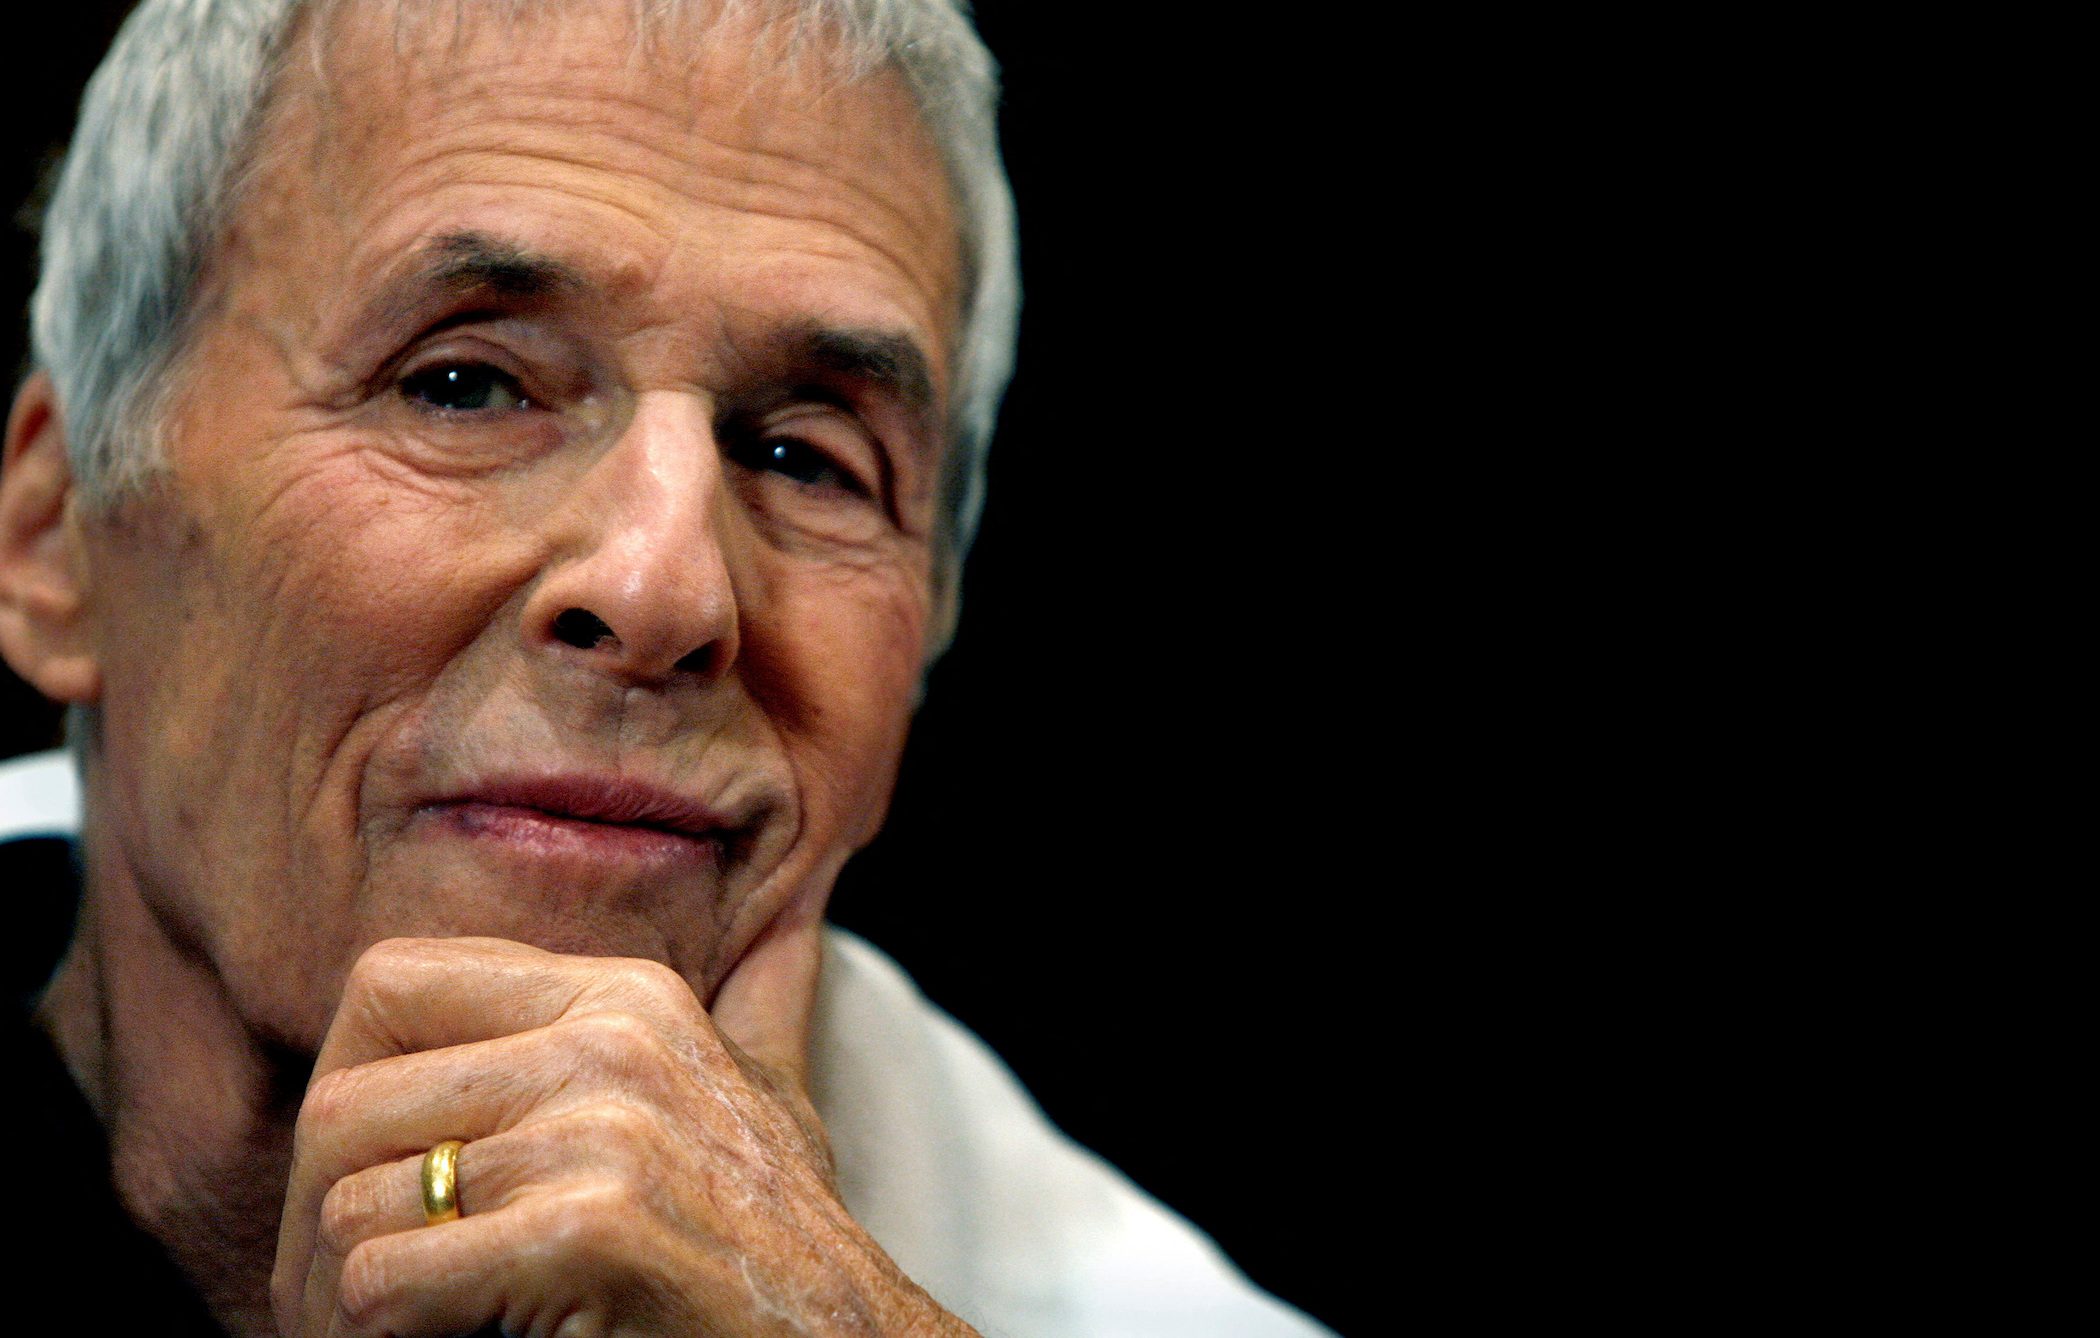 [Only IN Hollywood] I say a little prayer and a lot of thanks to Burt Bacharach for his music